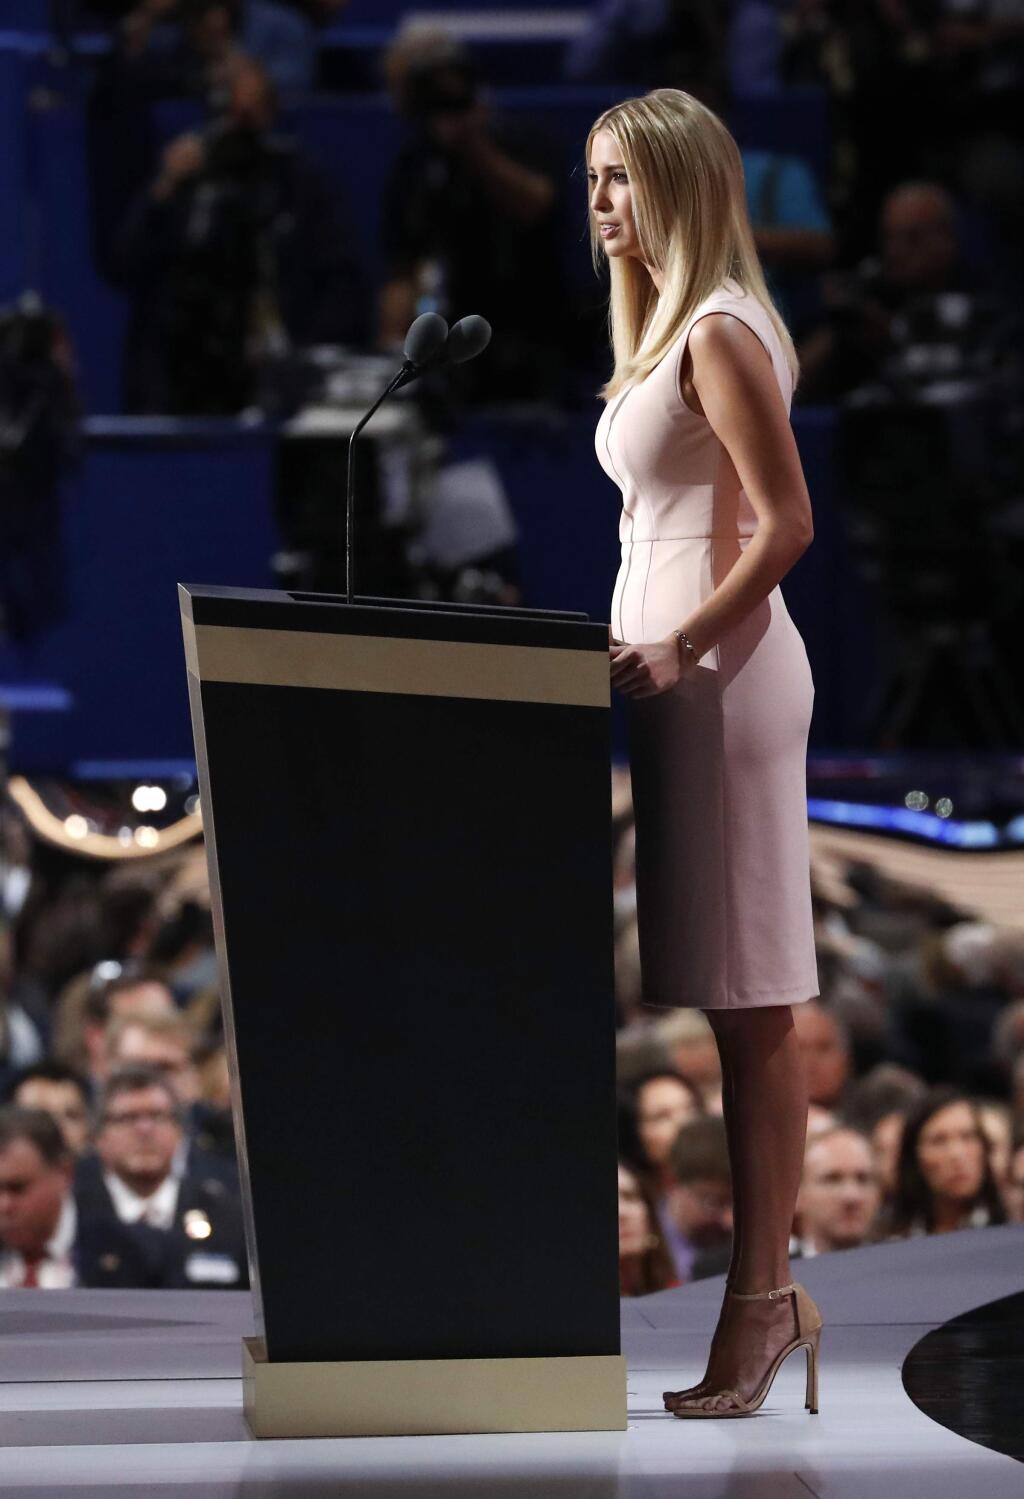 Ivanka Trump, daughter of Republican Presidential Nominee Donald J. Trump, speaks during the final day of the Republican National Convention.(PAUL SANCYA / Associated Press)